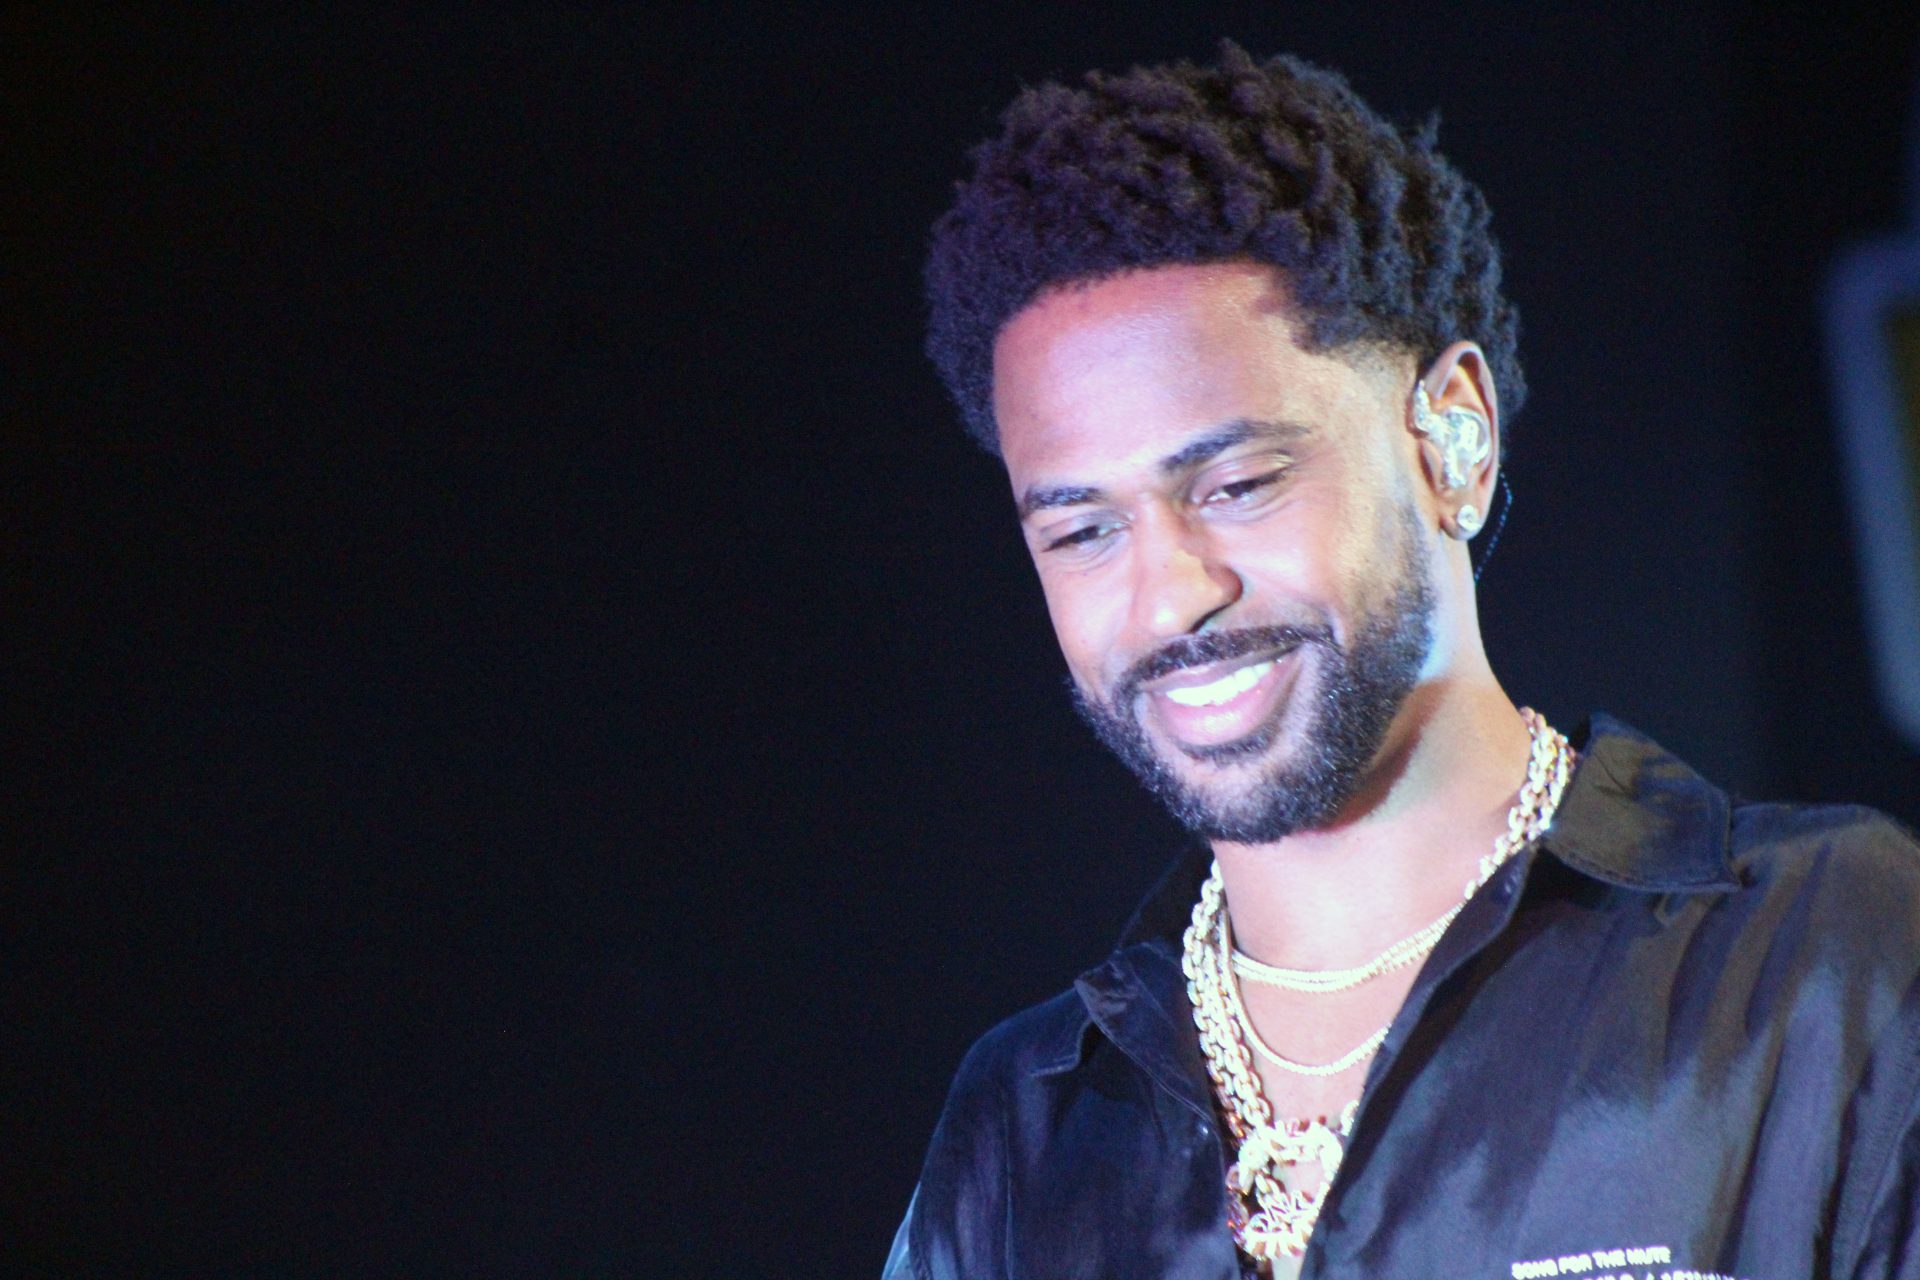 Big Sean and Trey Songz show how it's done at WGCI's Summer Jam